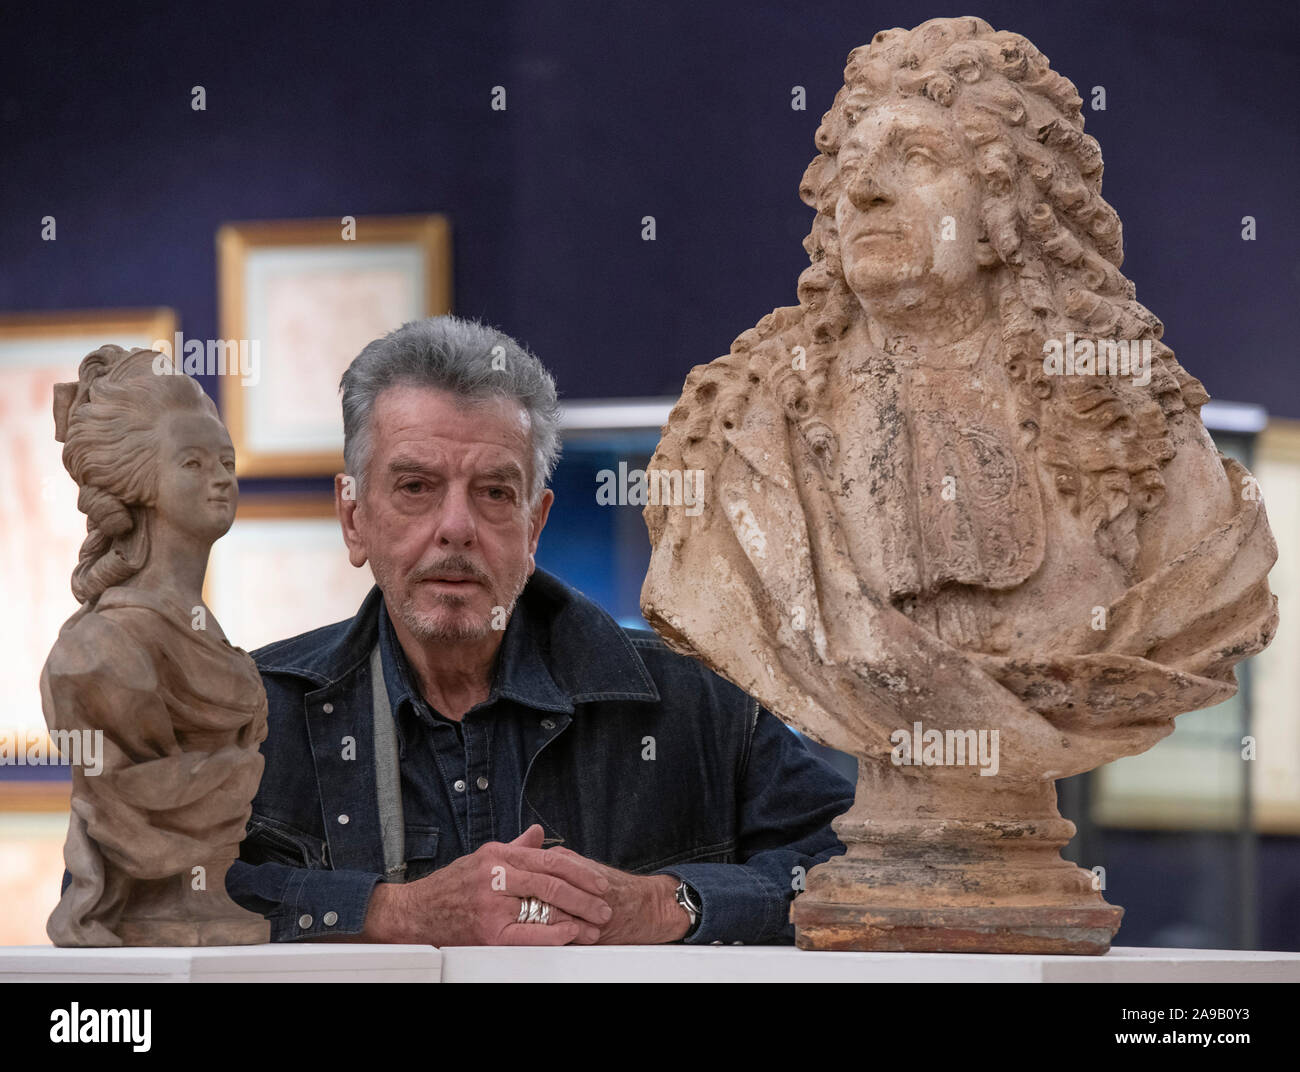 Bonhams, London, UK. 14th November 2019. Nicky Haslam, one of the world’s most celebrated interior designers, attends a photo call at Bonhams for the sale of his impressive collection from the Hunting Lodge in Hampshire, where Haslam has lived since 1978. Image: Nicky Haslam  with (right) French Terracotta washed plaster Bust of an 18th Century Nobleman.  Estimate: £800-1200. Credit: Malcolm Park/Alamy Live News. Stock Photo